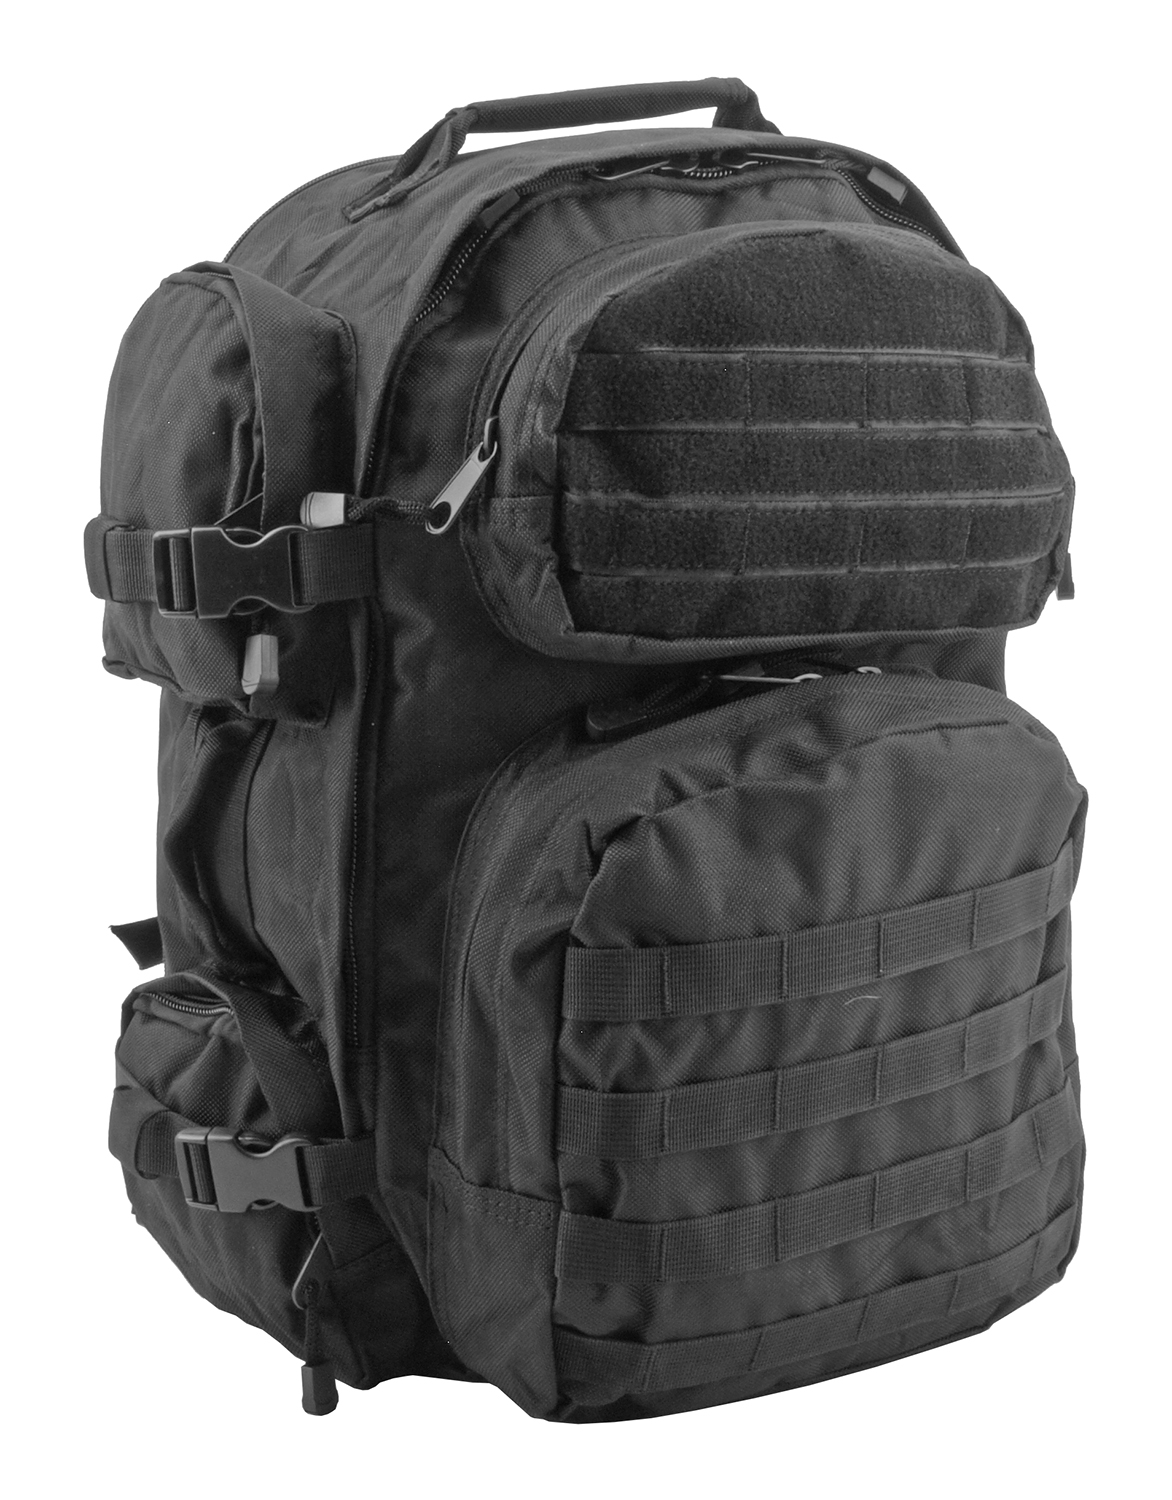 Special Operations Tactical Gear Backpack - Black